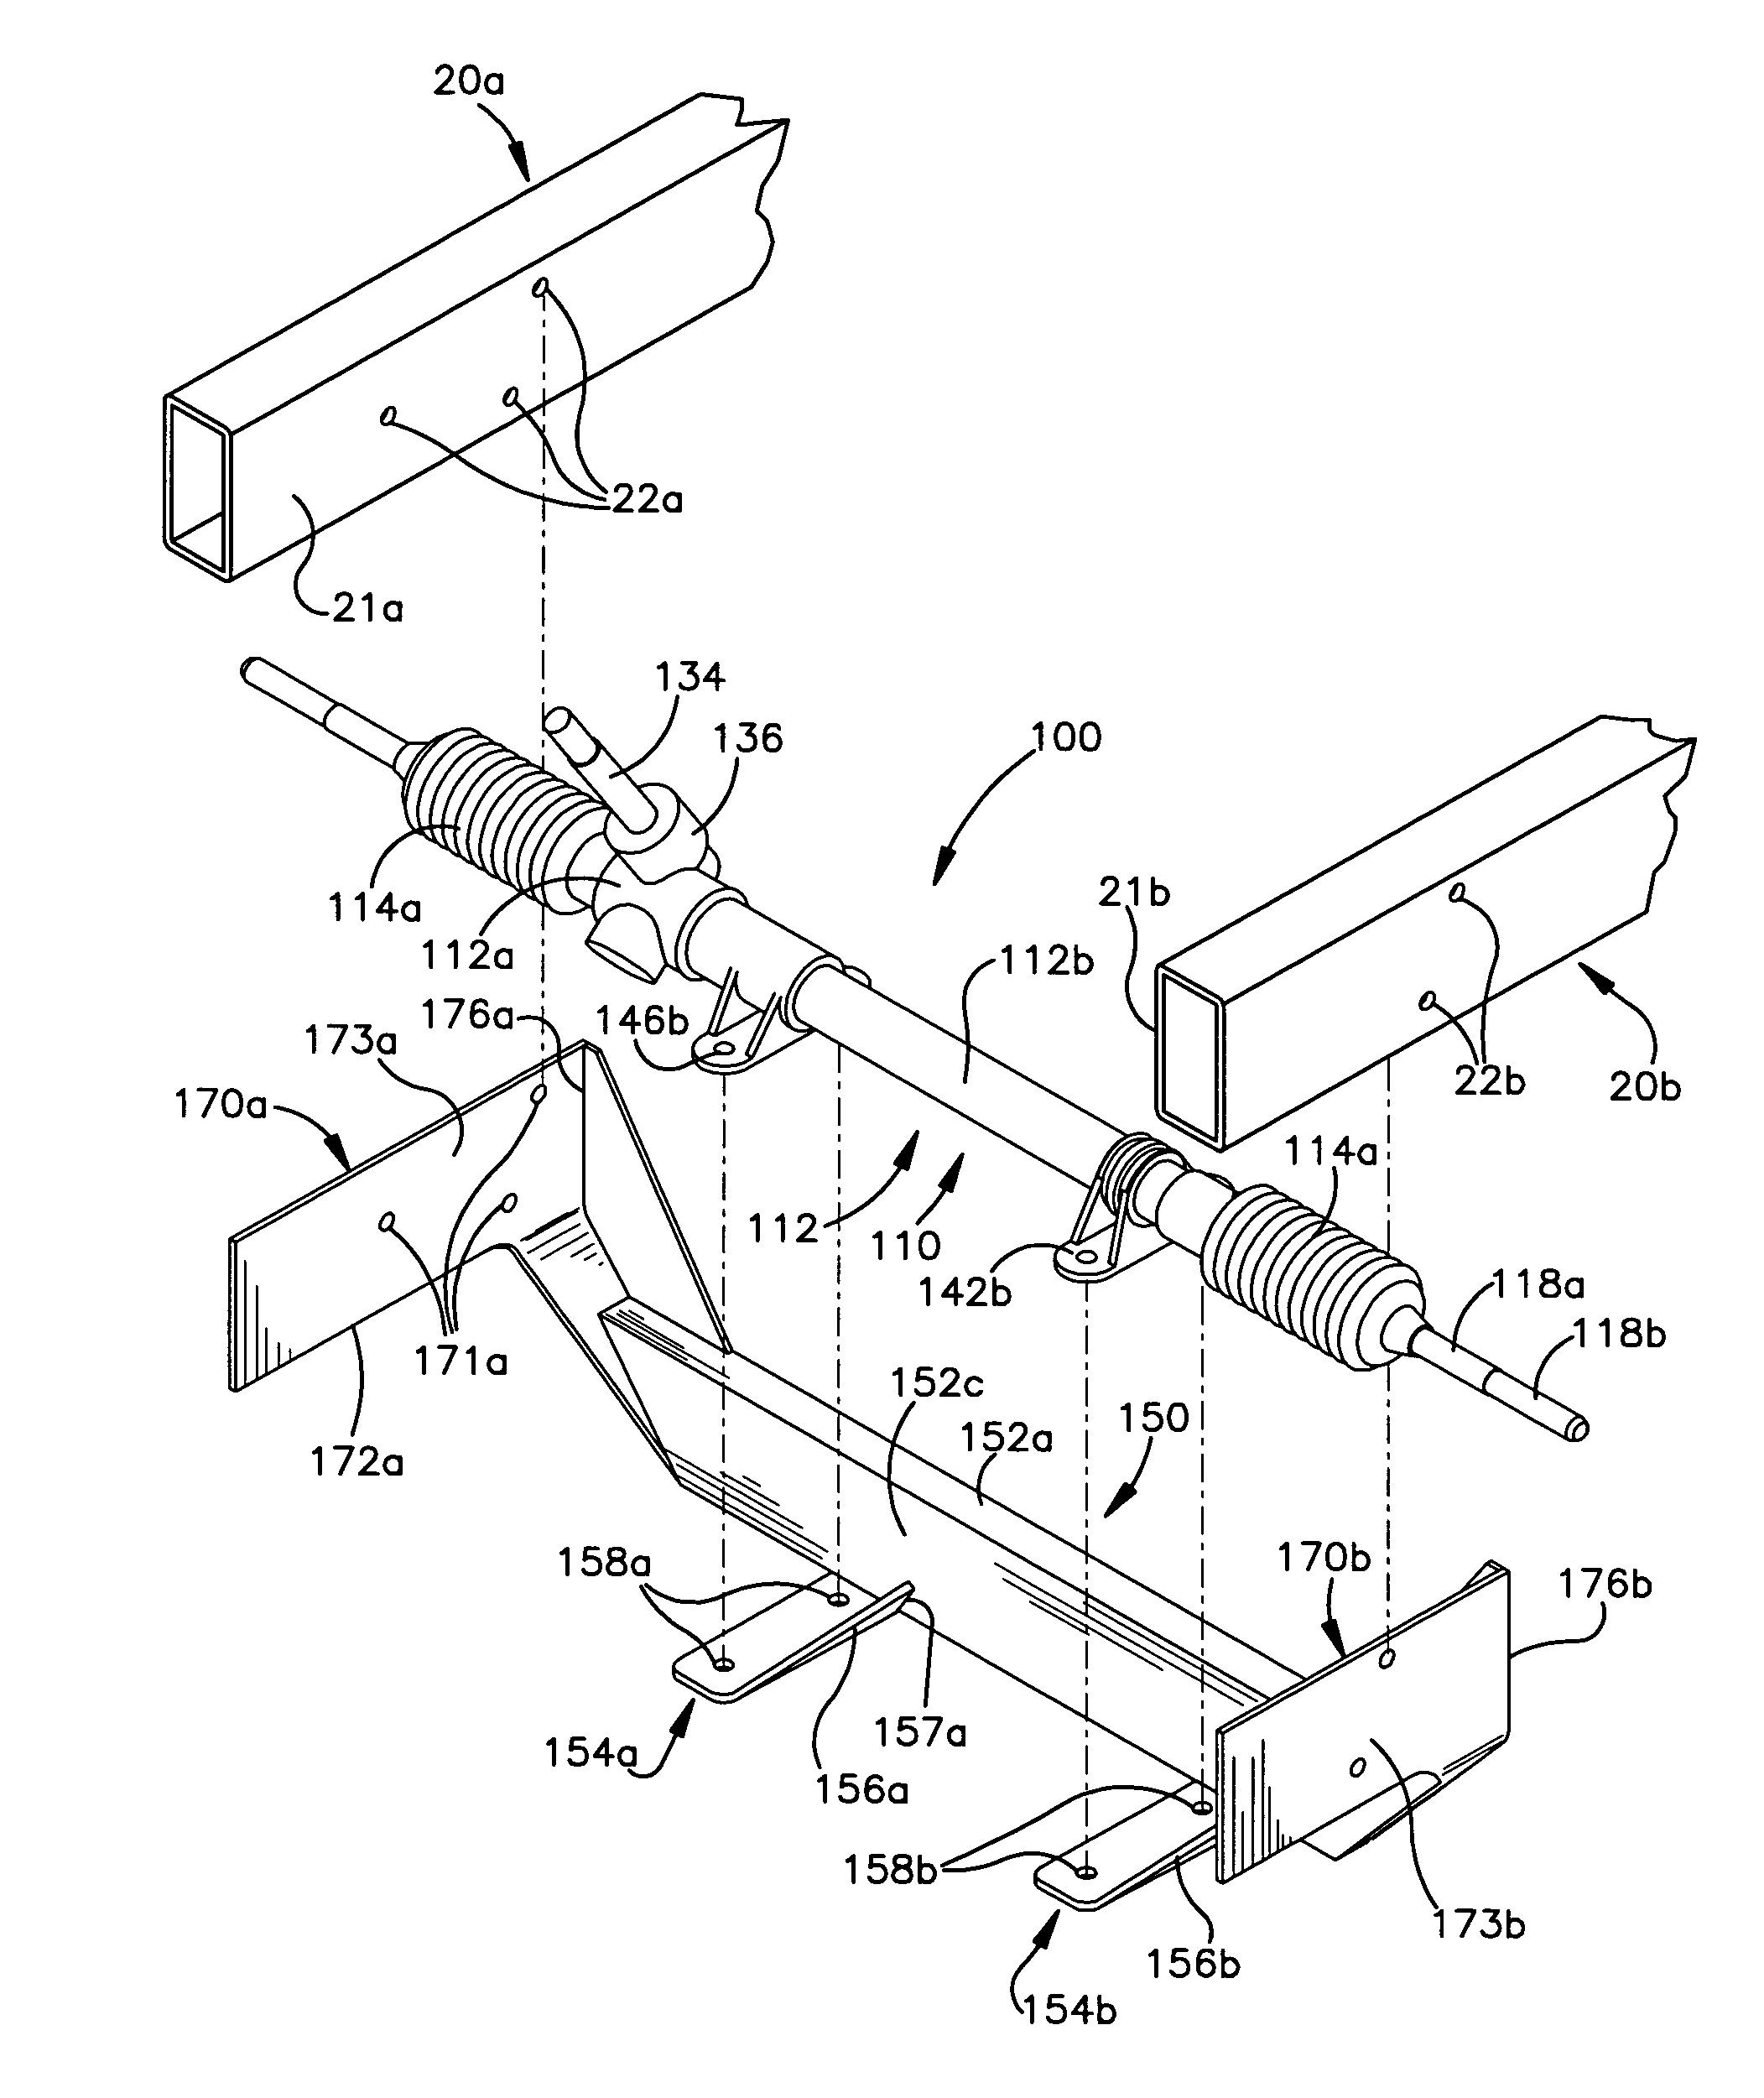 Cradle for steering assembly